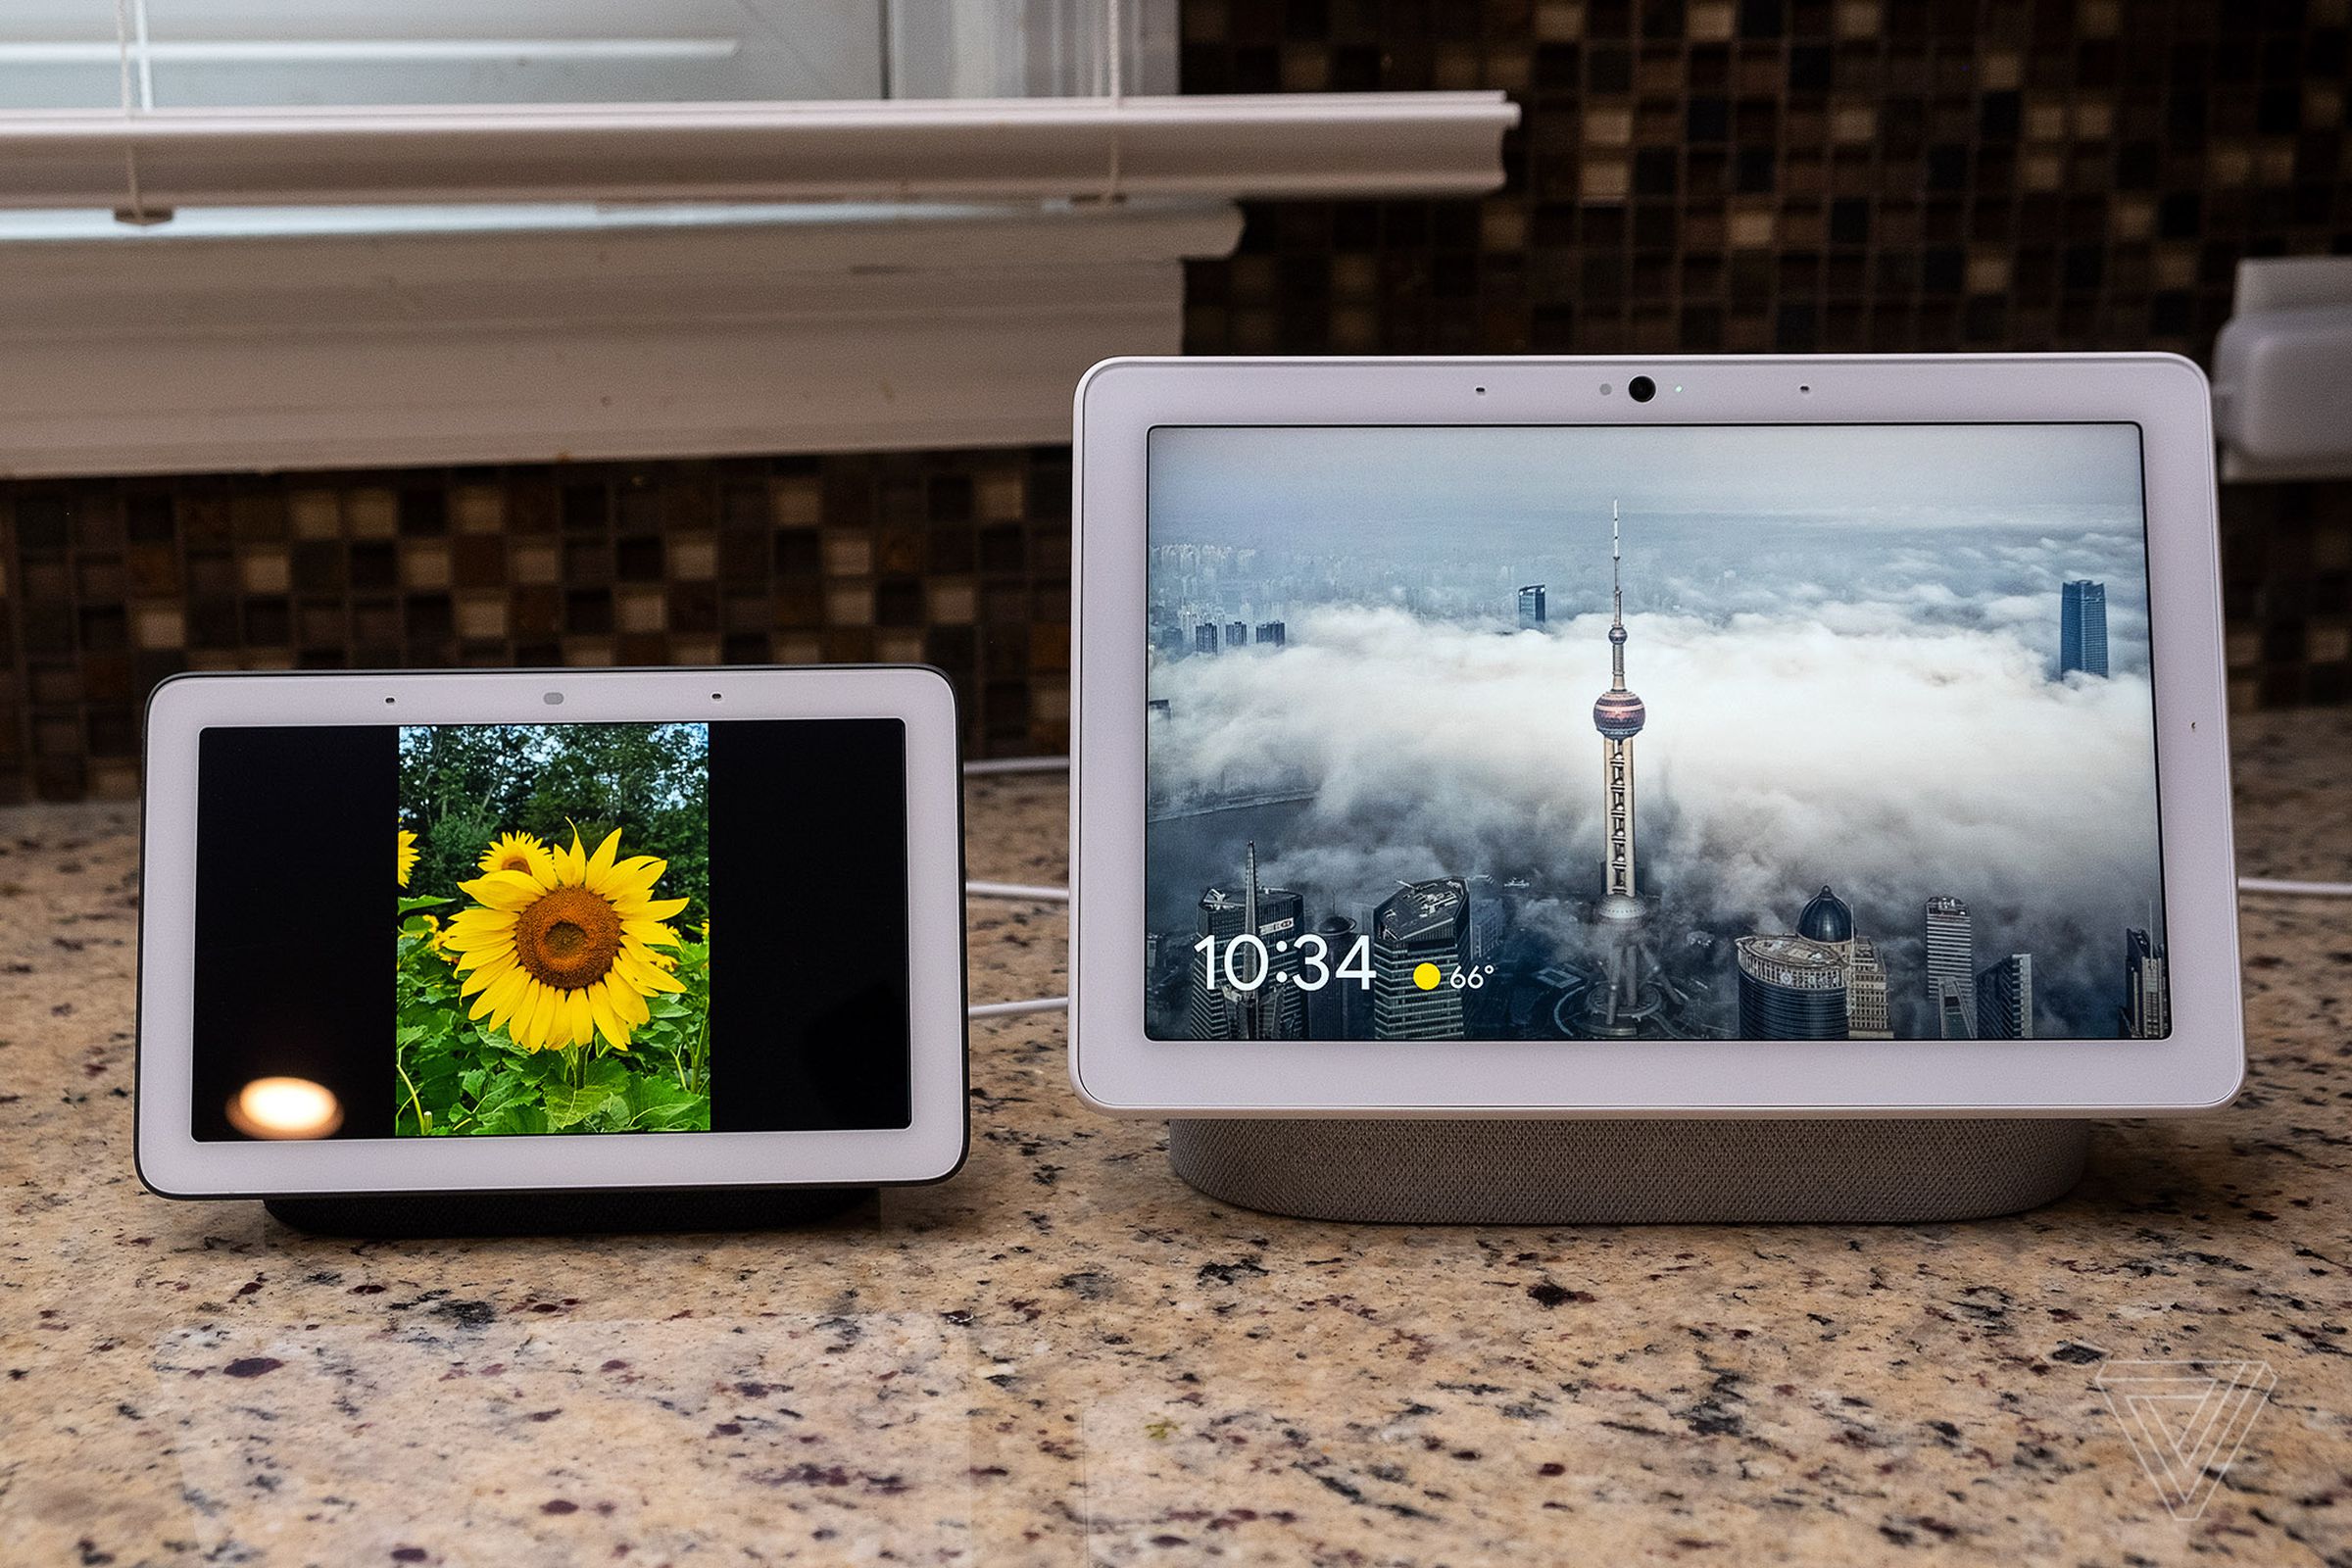 The Nest Hub (left) and the Nest Hub Max (right) both make great digital picture frames.